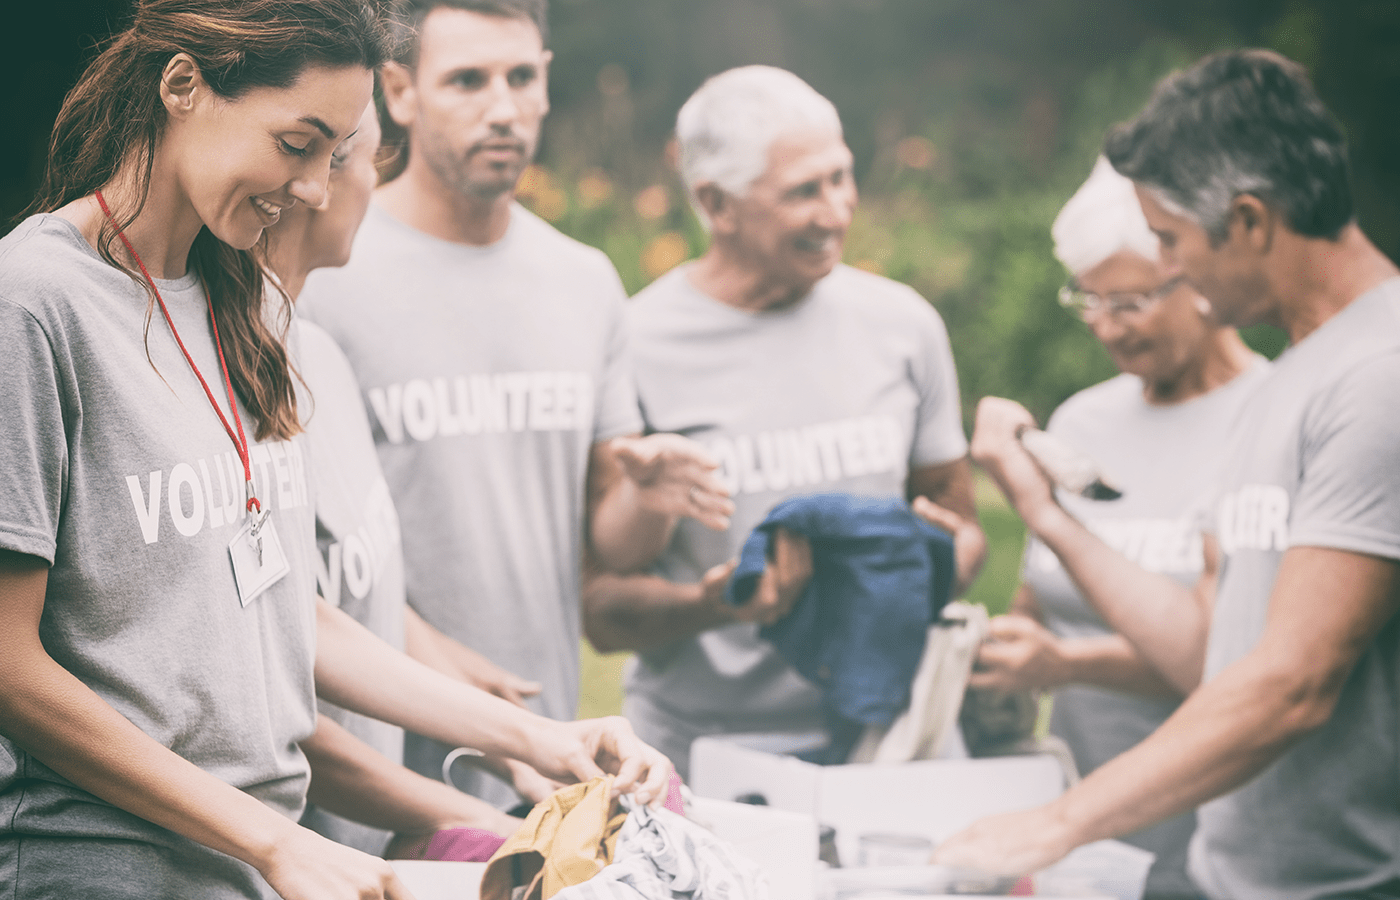 How to Balance Volunteering While Studying